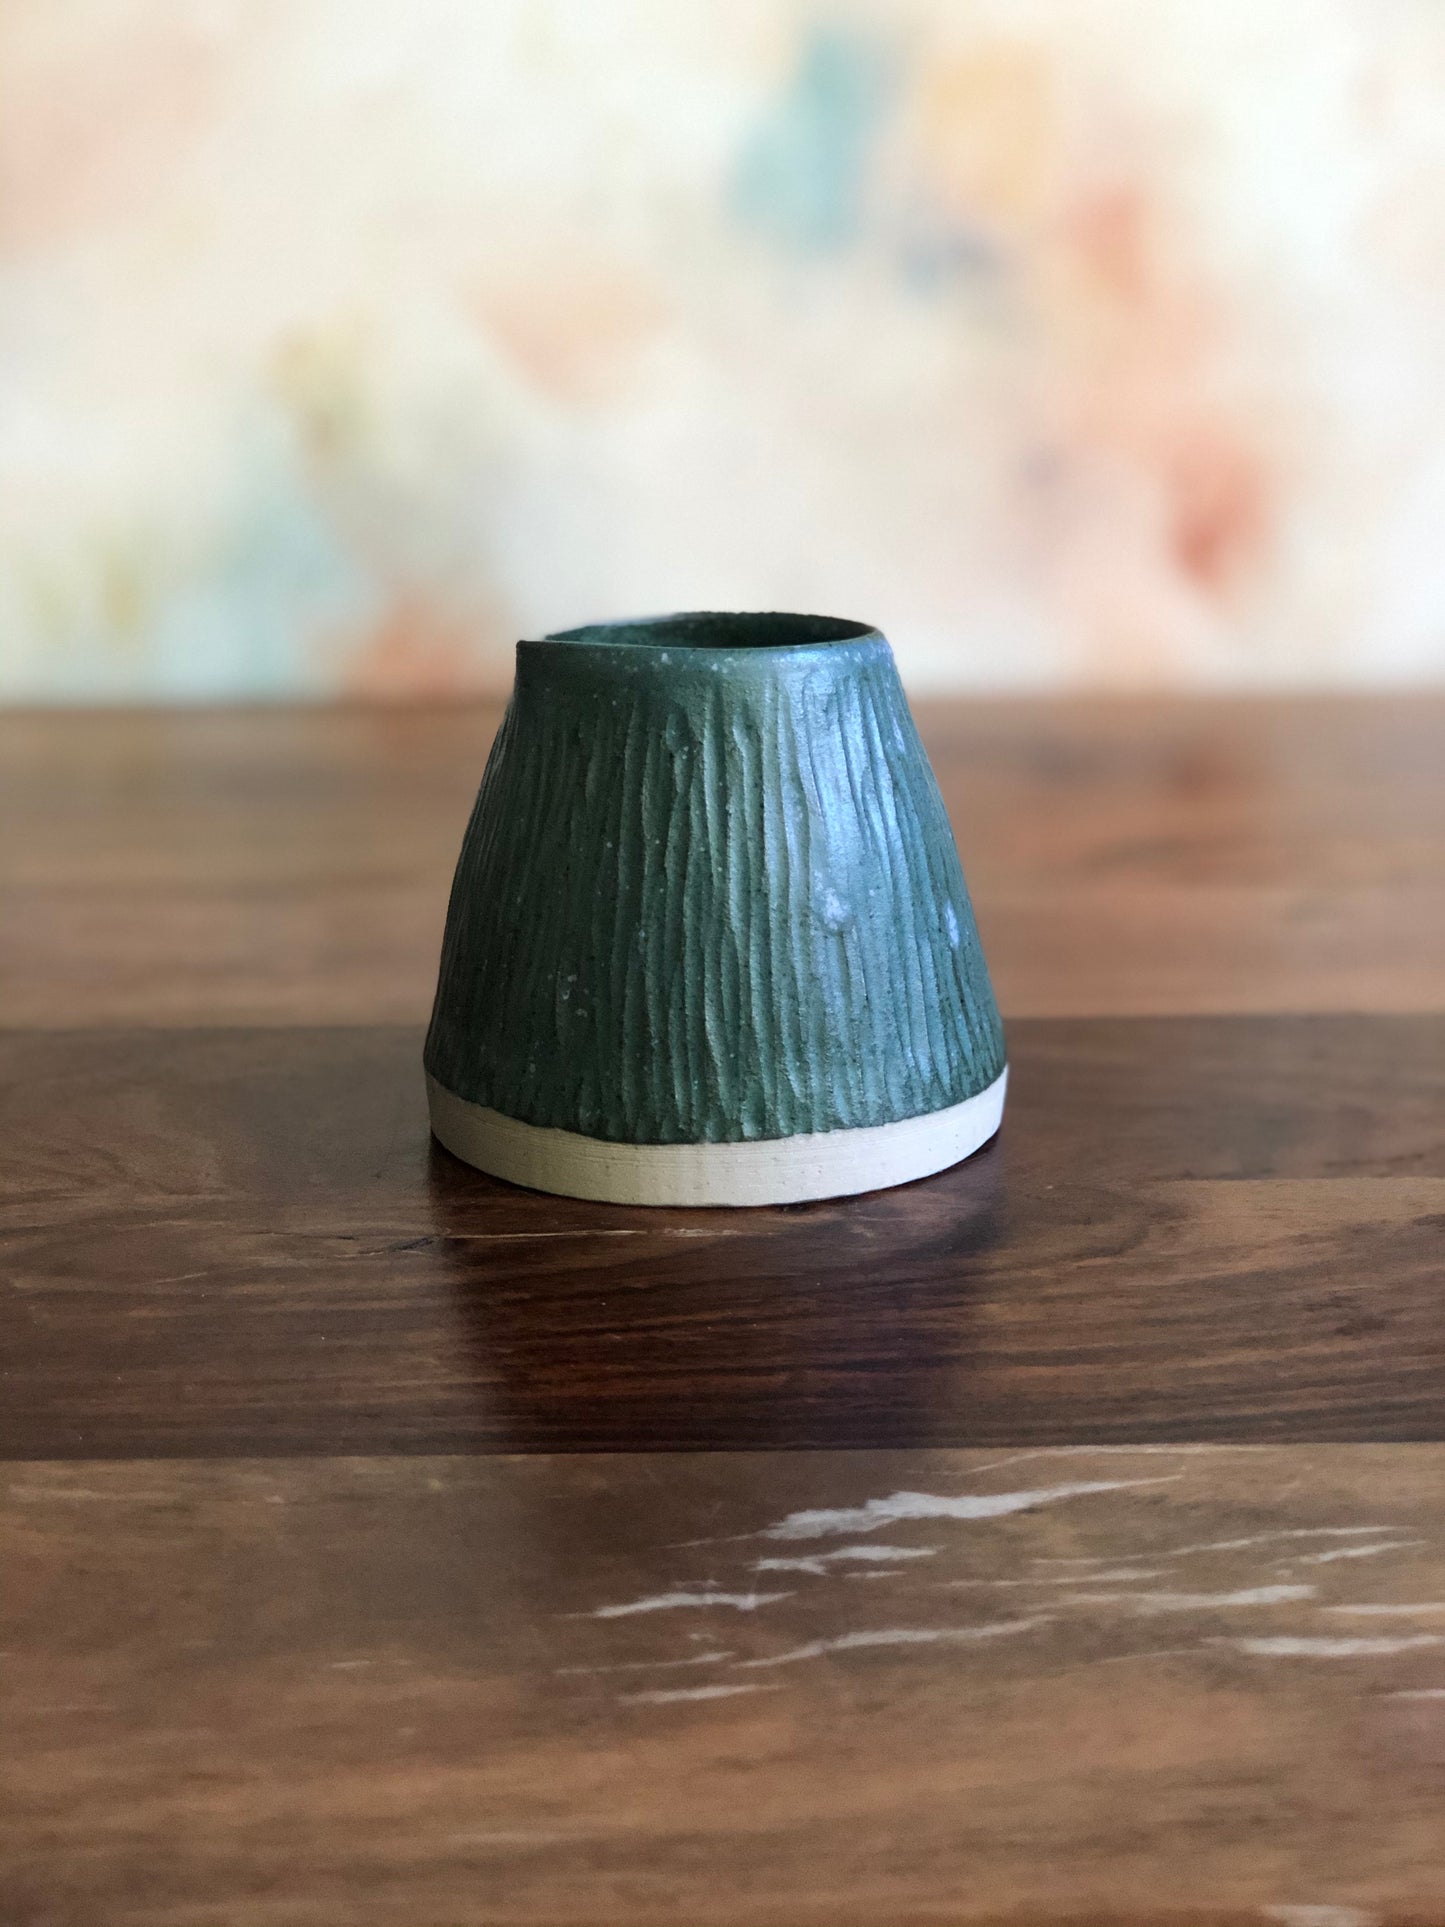 Carved green conical pourer